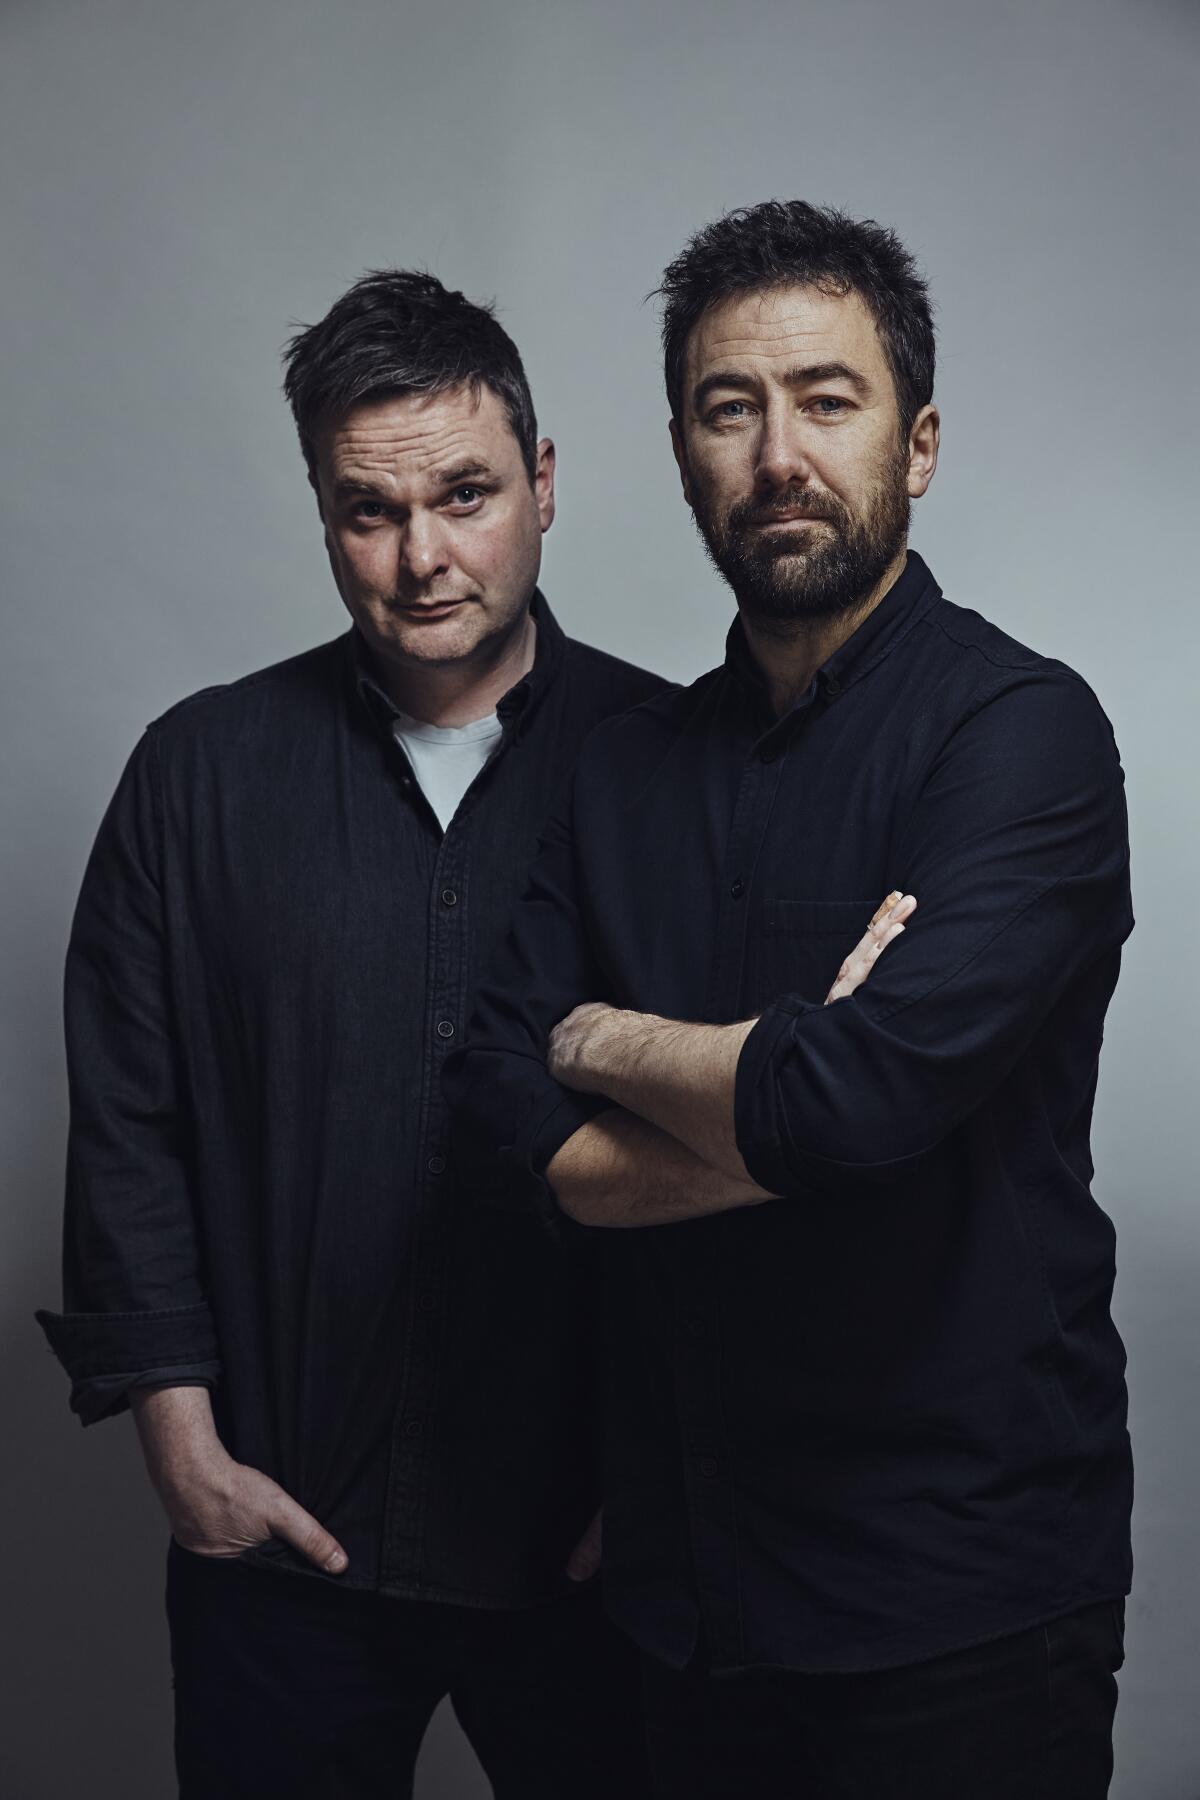 Two men in dark shirts and trousers posing for a photograph.